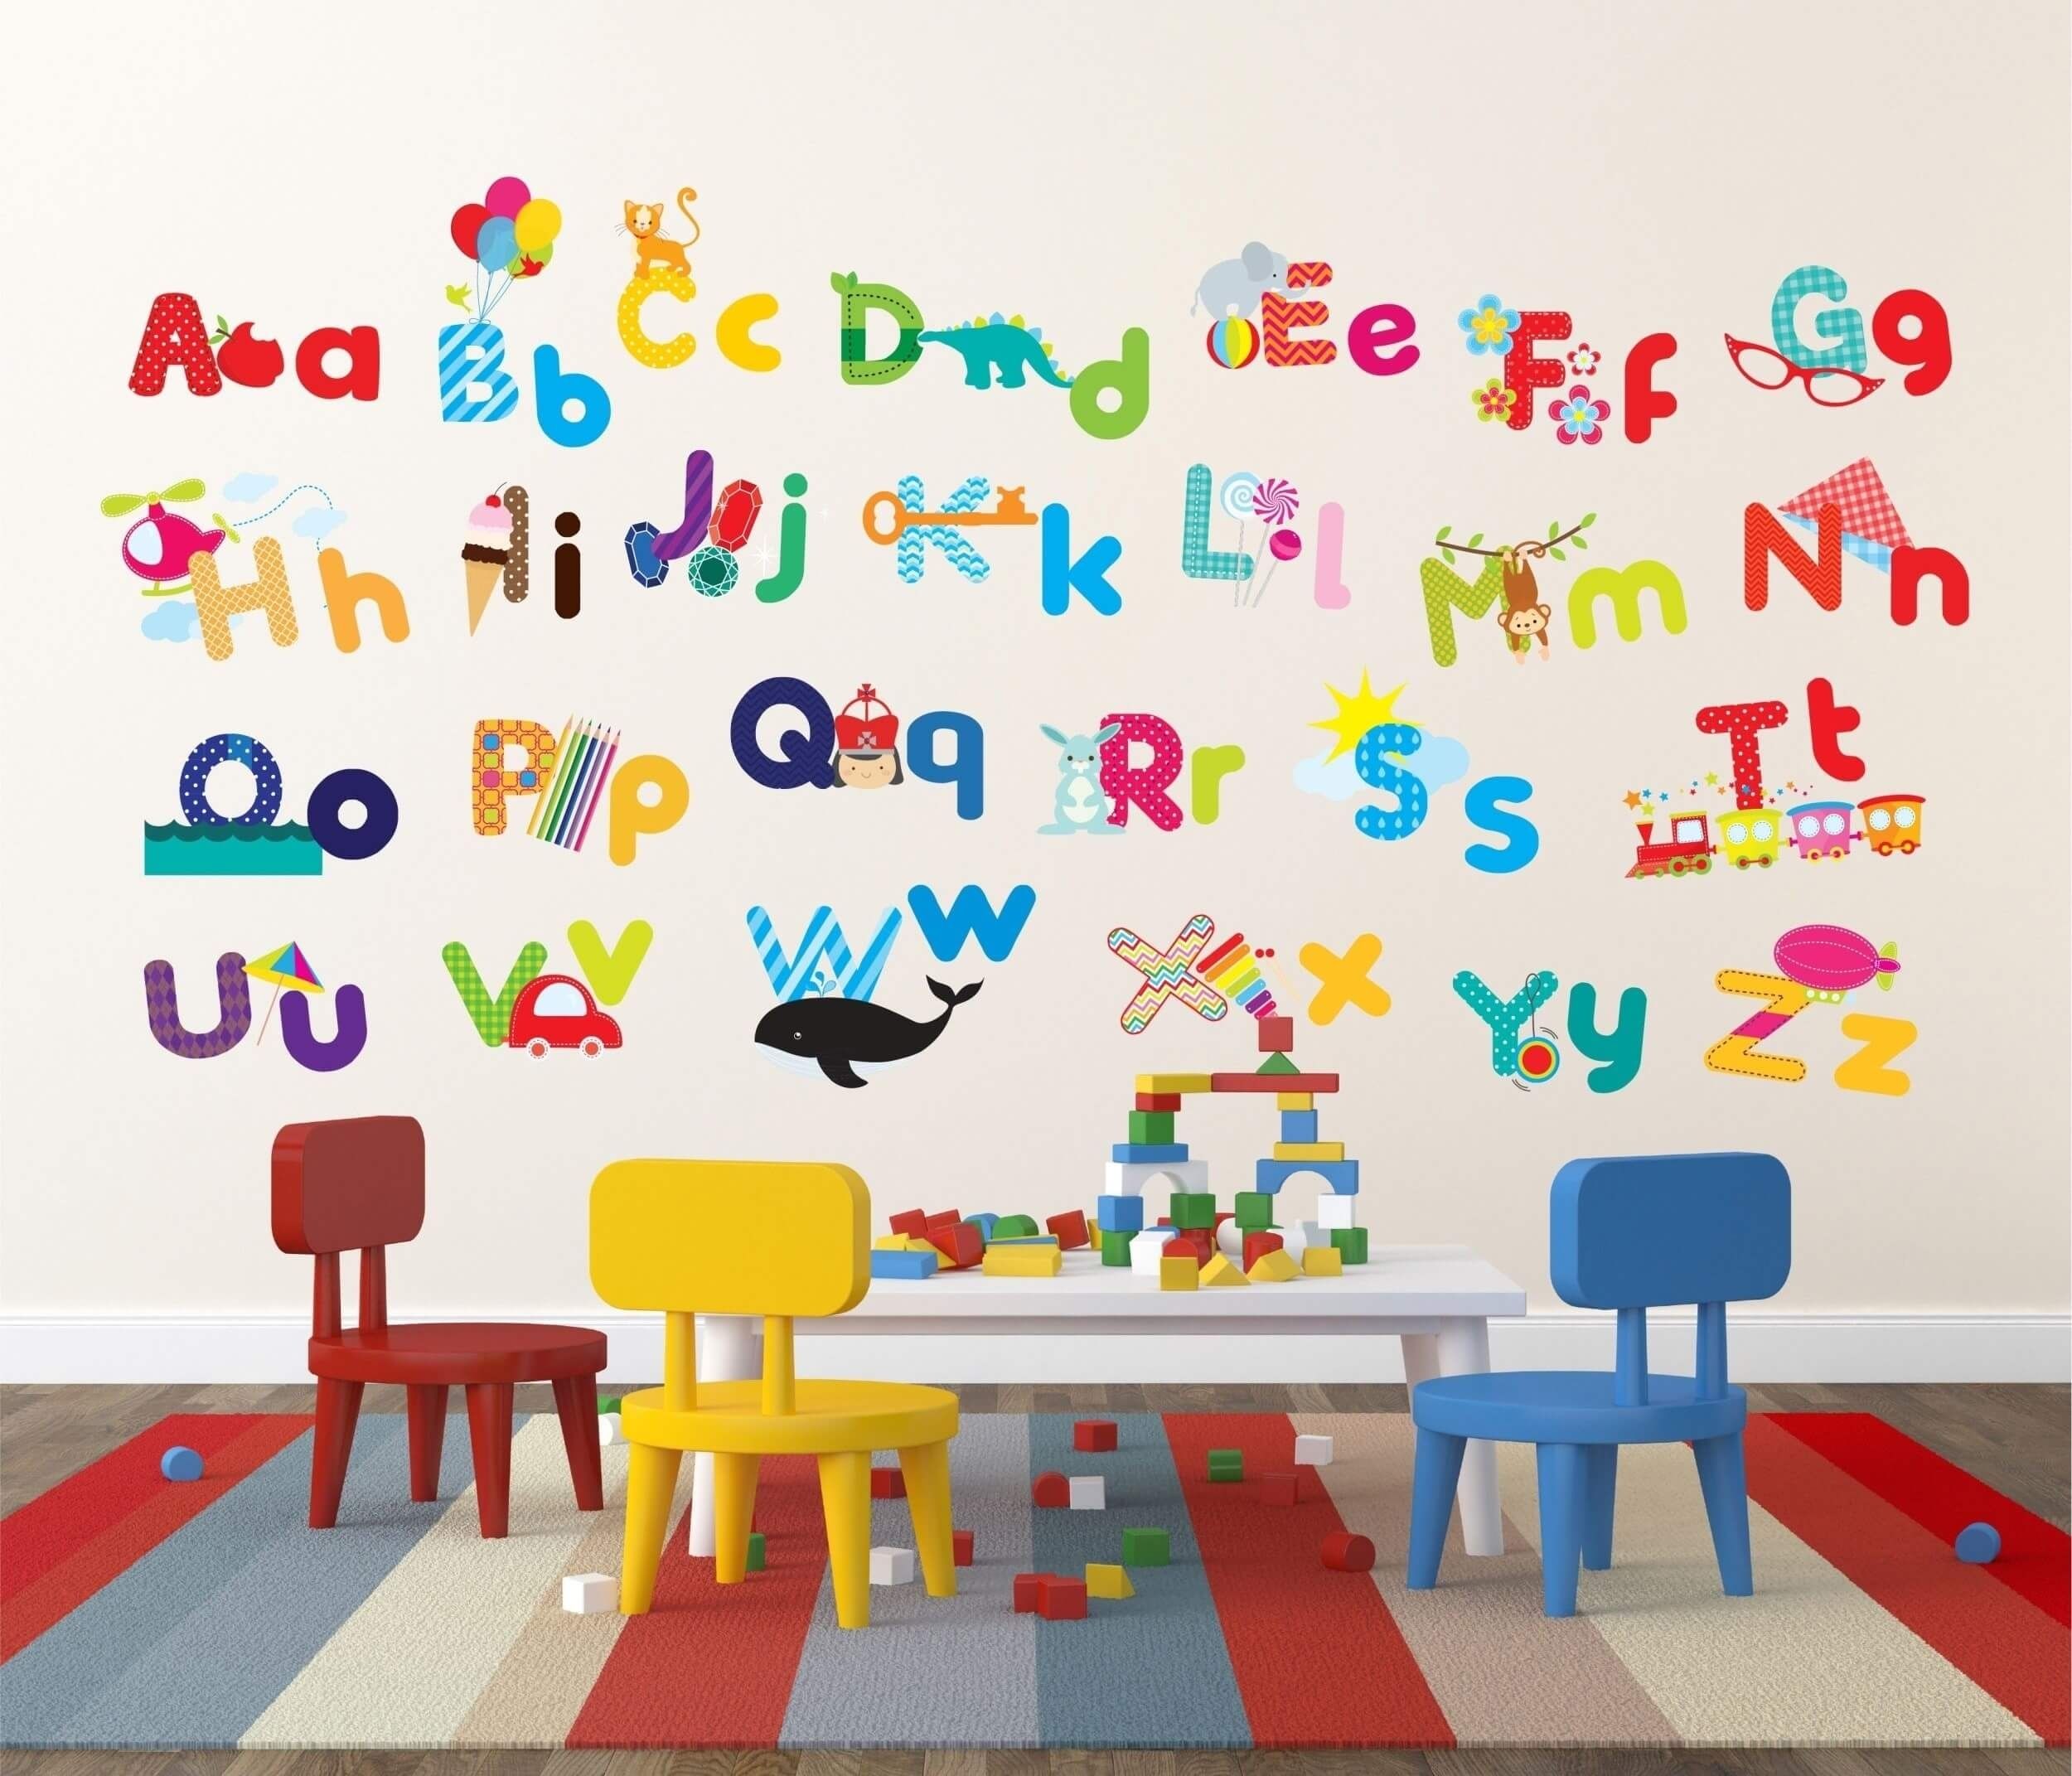 These Educational Wall Ideas Are Perfect For Kids | Nonagon (View 8 of 20)